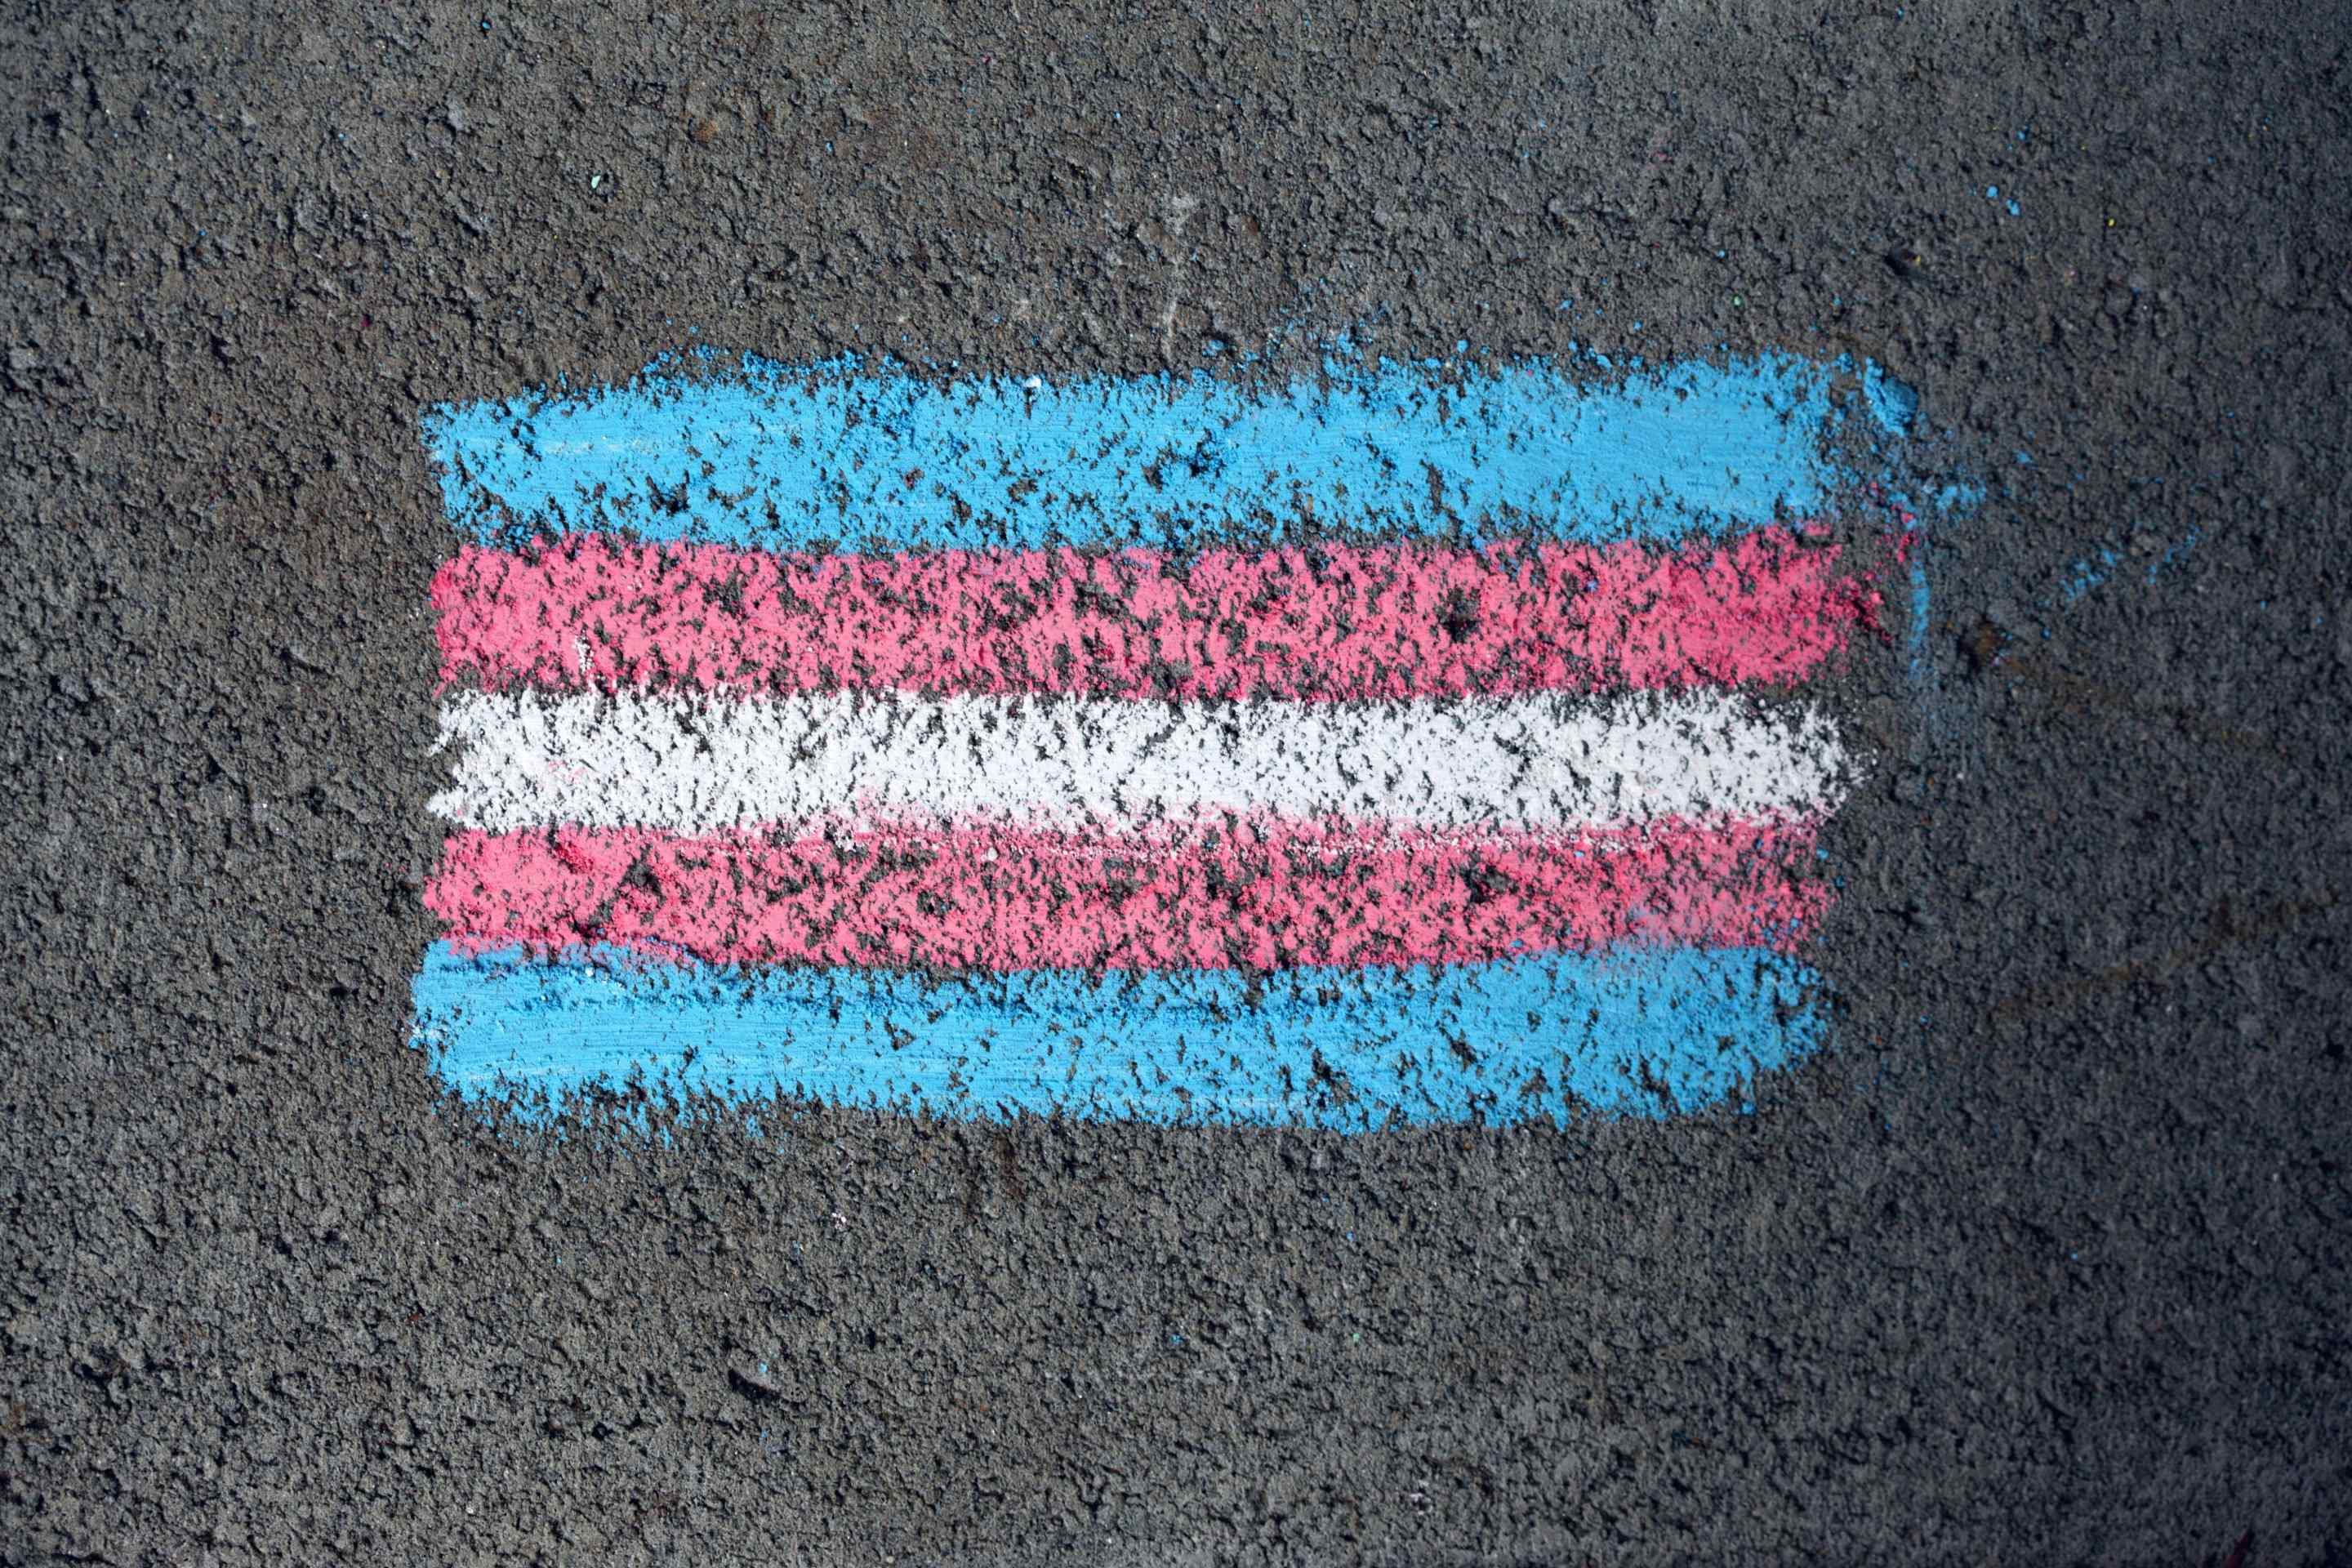 A trans flag, made of blue, pink, and white stripes, in chalk on black pavement